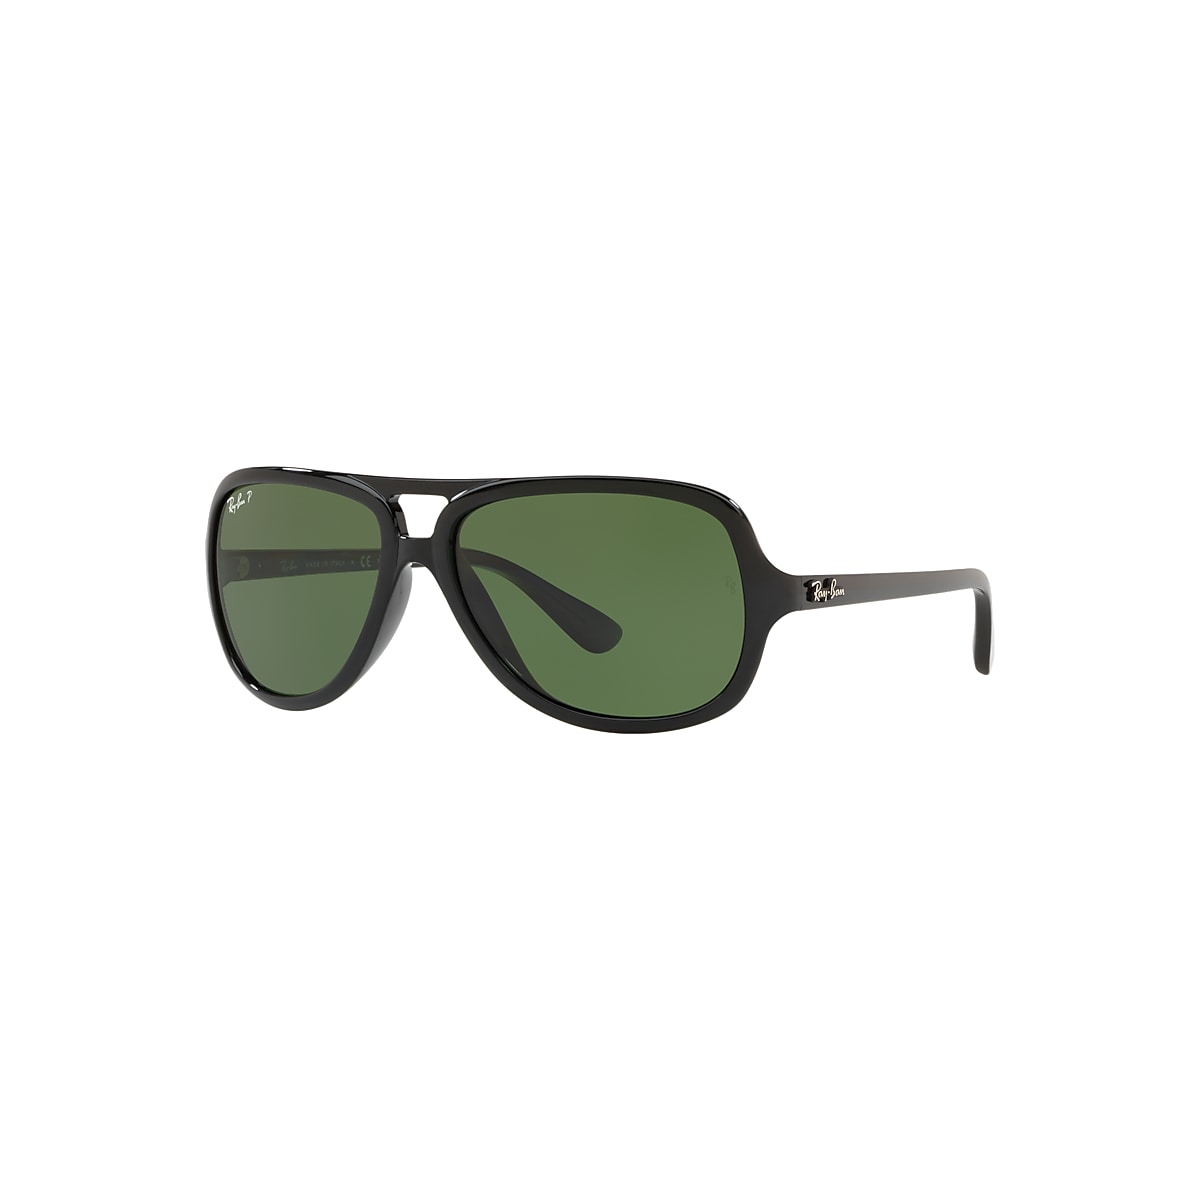 Min ophouden bijkeuken RB4162 Sunglasses in Black and Green - RB4162 | Ray-Ban® US